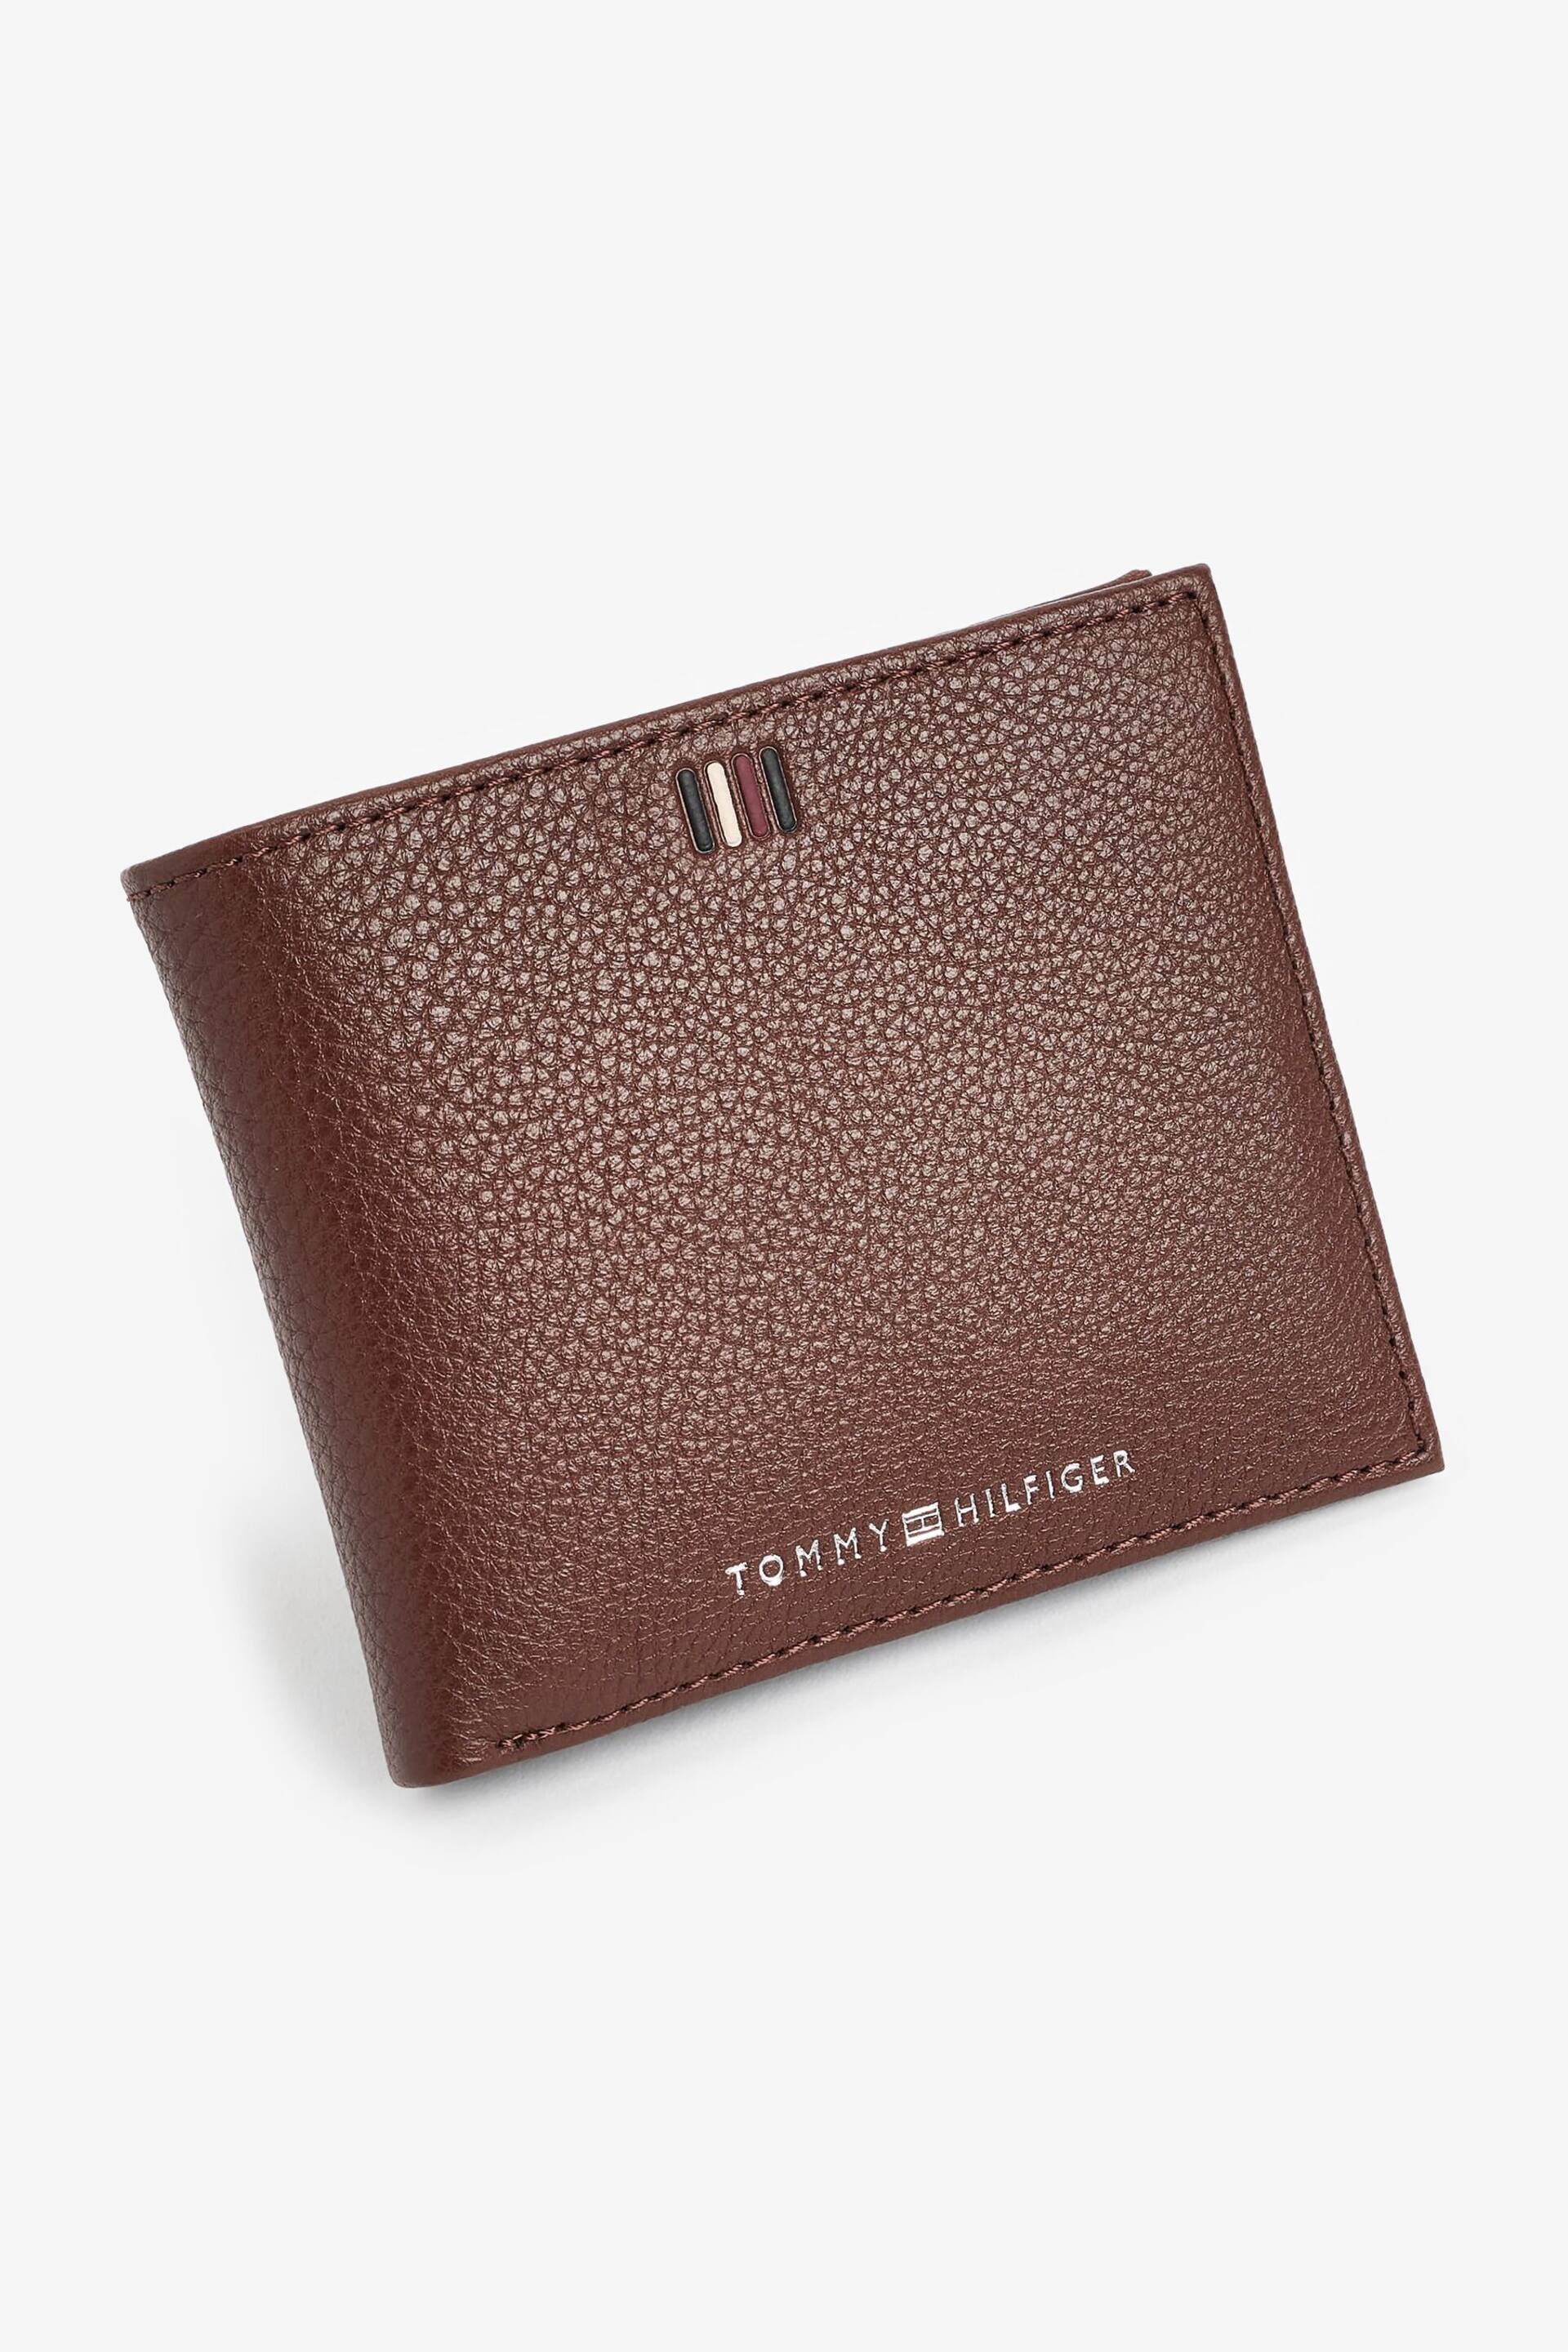 Tommy Hilfiger Central Card and Coin Brown Wallet - Image 1 of 4